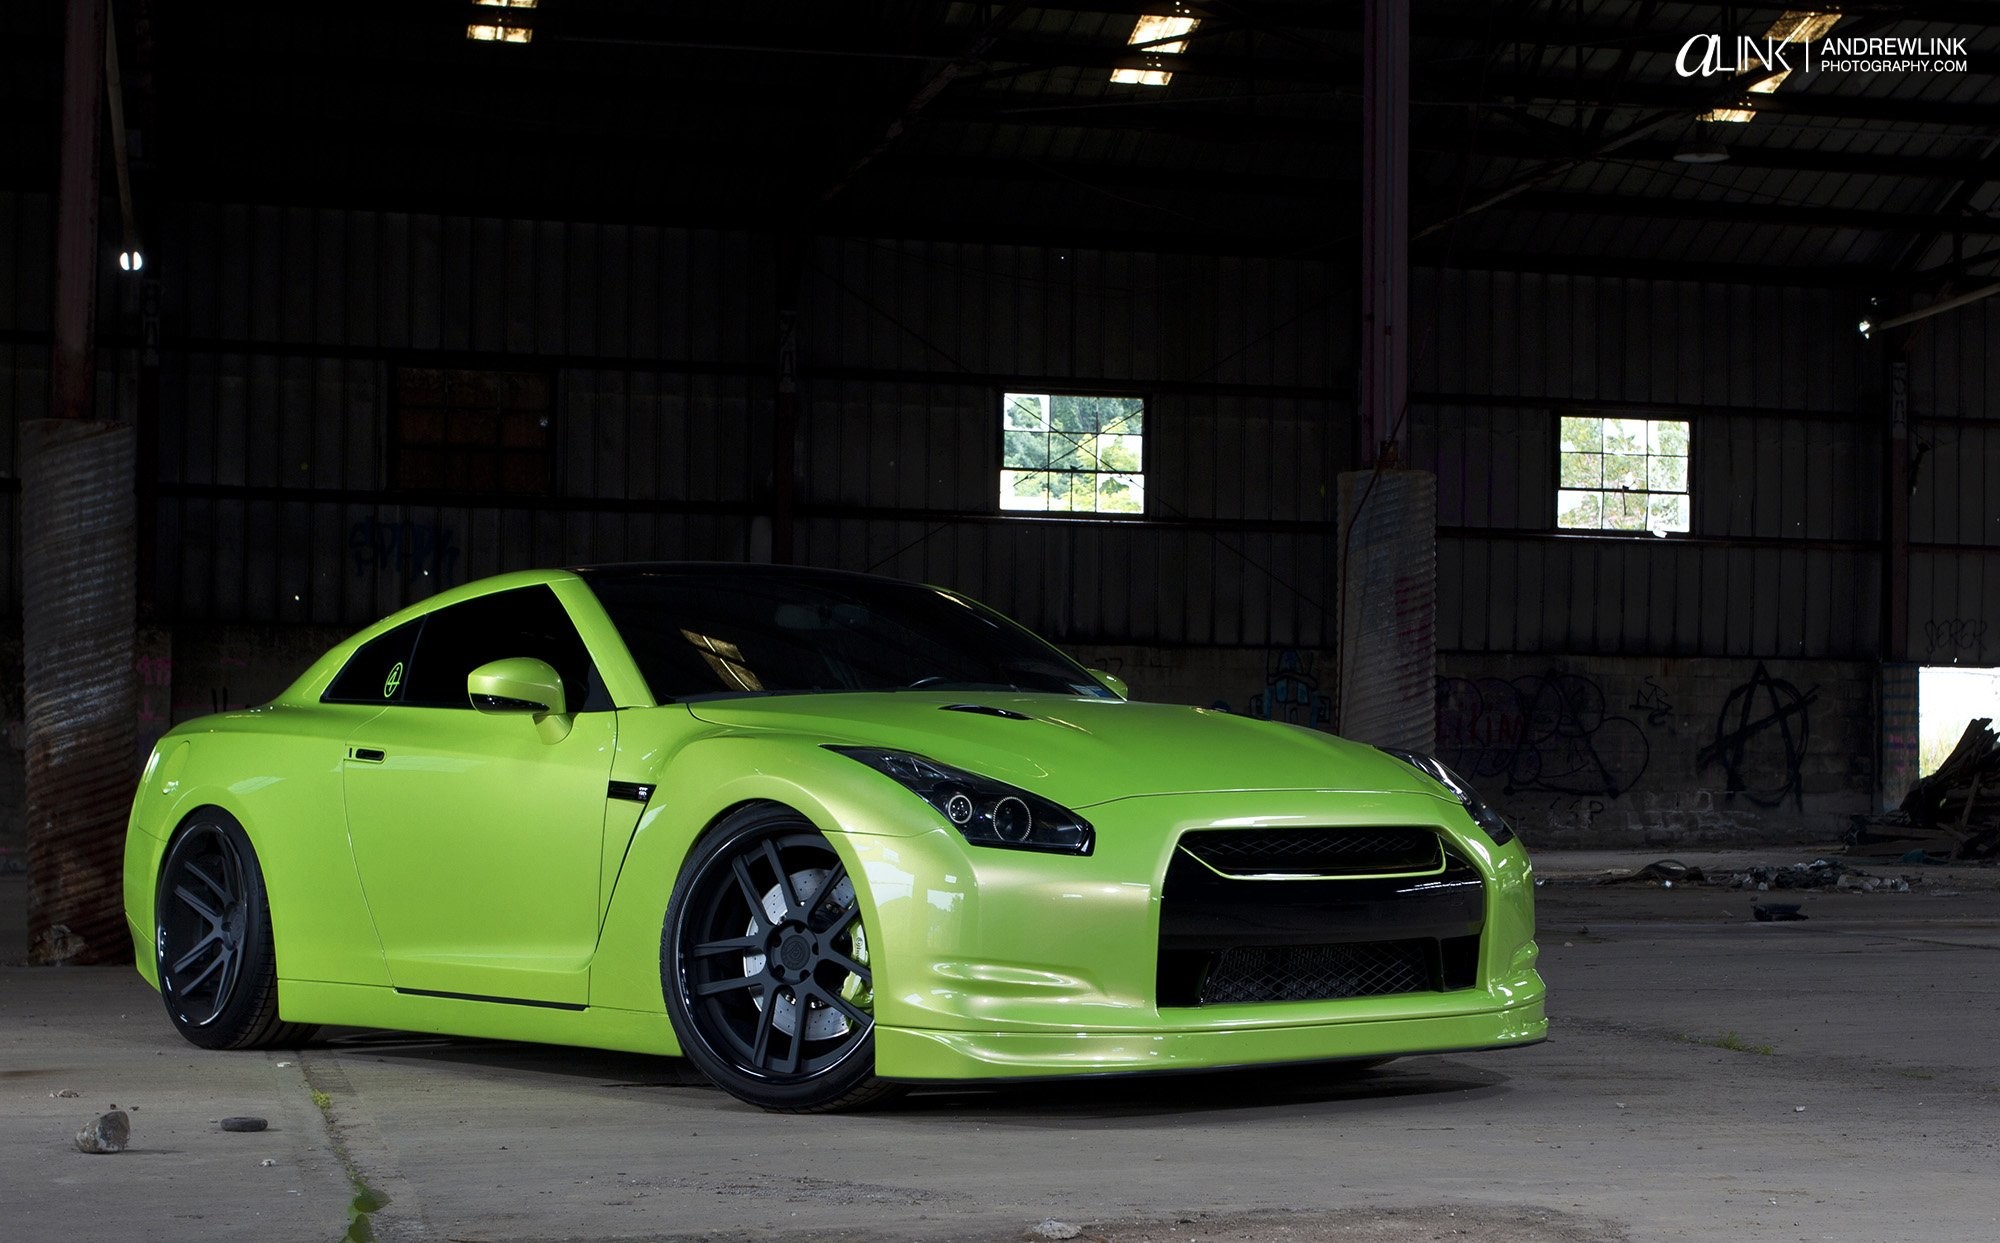 2000x1243 GT-R nismo Nissan R35 TUNING Supercar coupe japan cars green verte verde  wallpaper |  | 494946 | WallpaperUP